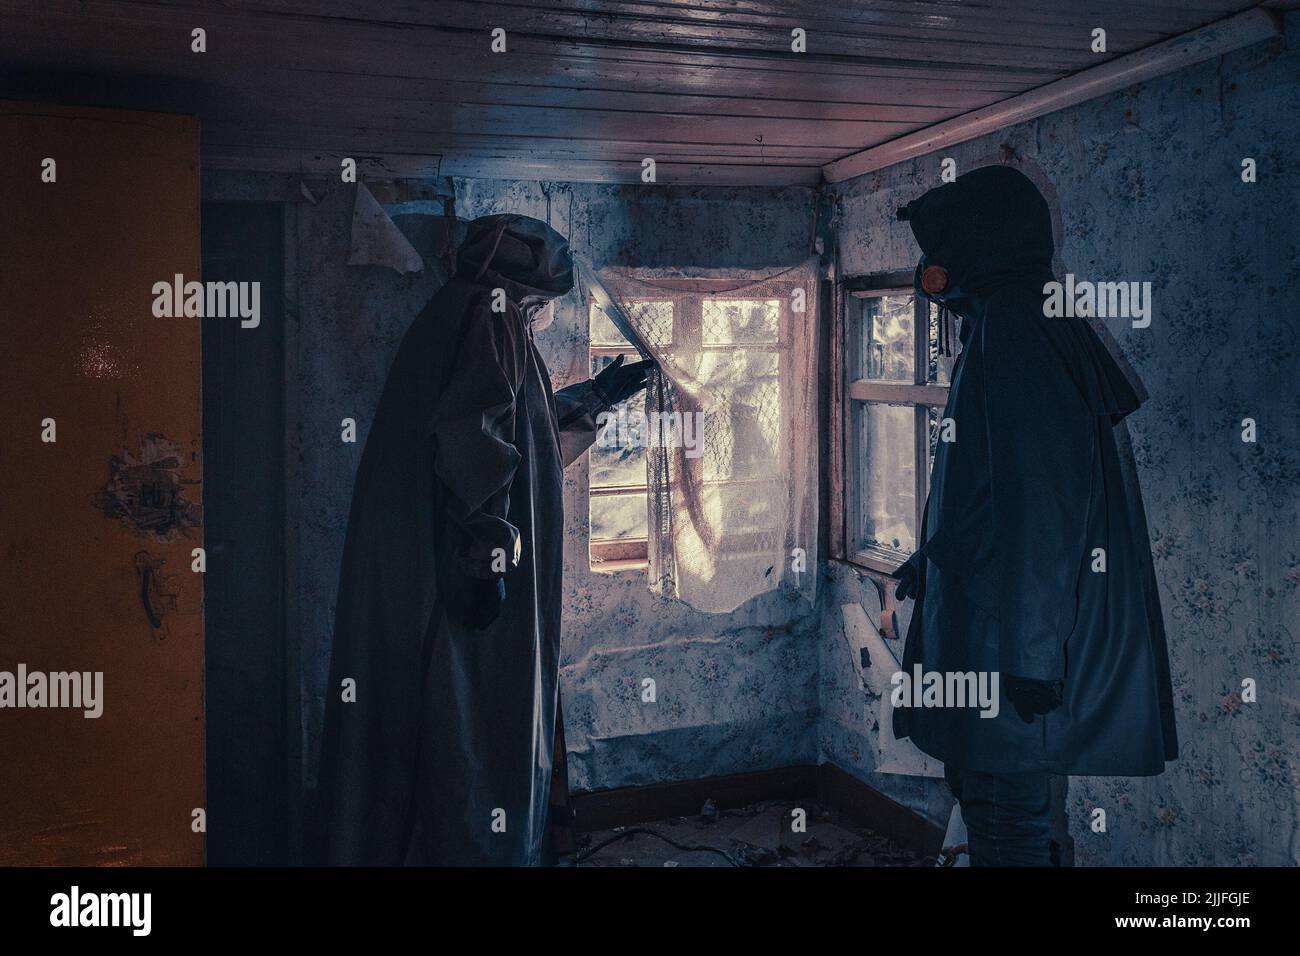 Fictional movie poster. People with flashlights, masks and protective clothing inspect old house. Infected epidemic people in destroyed home. Dark gloomy environment, filter processing.  Stock Photo